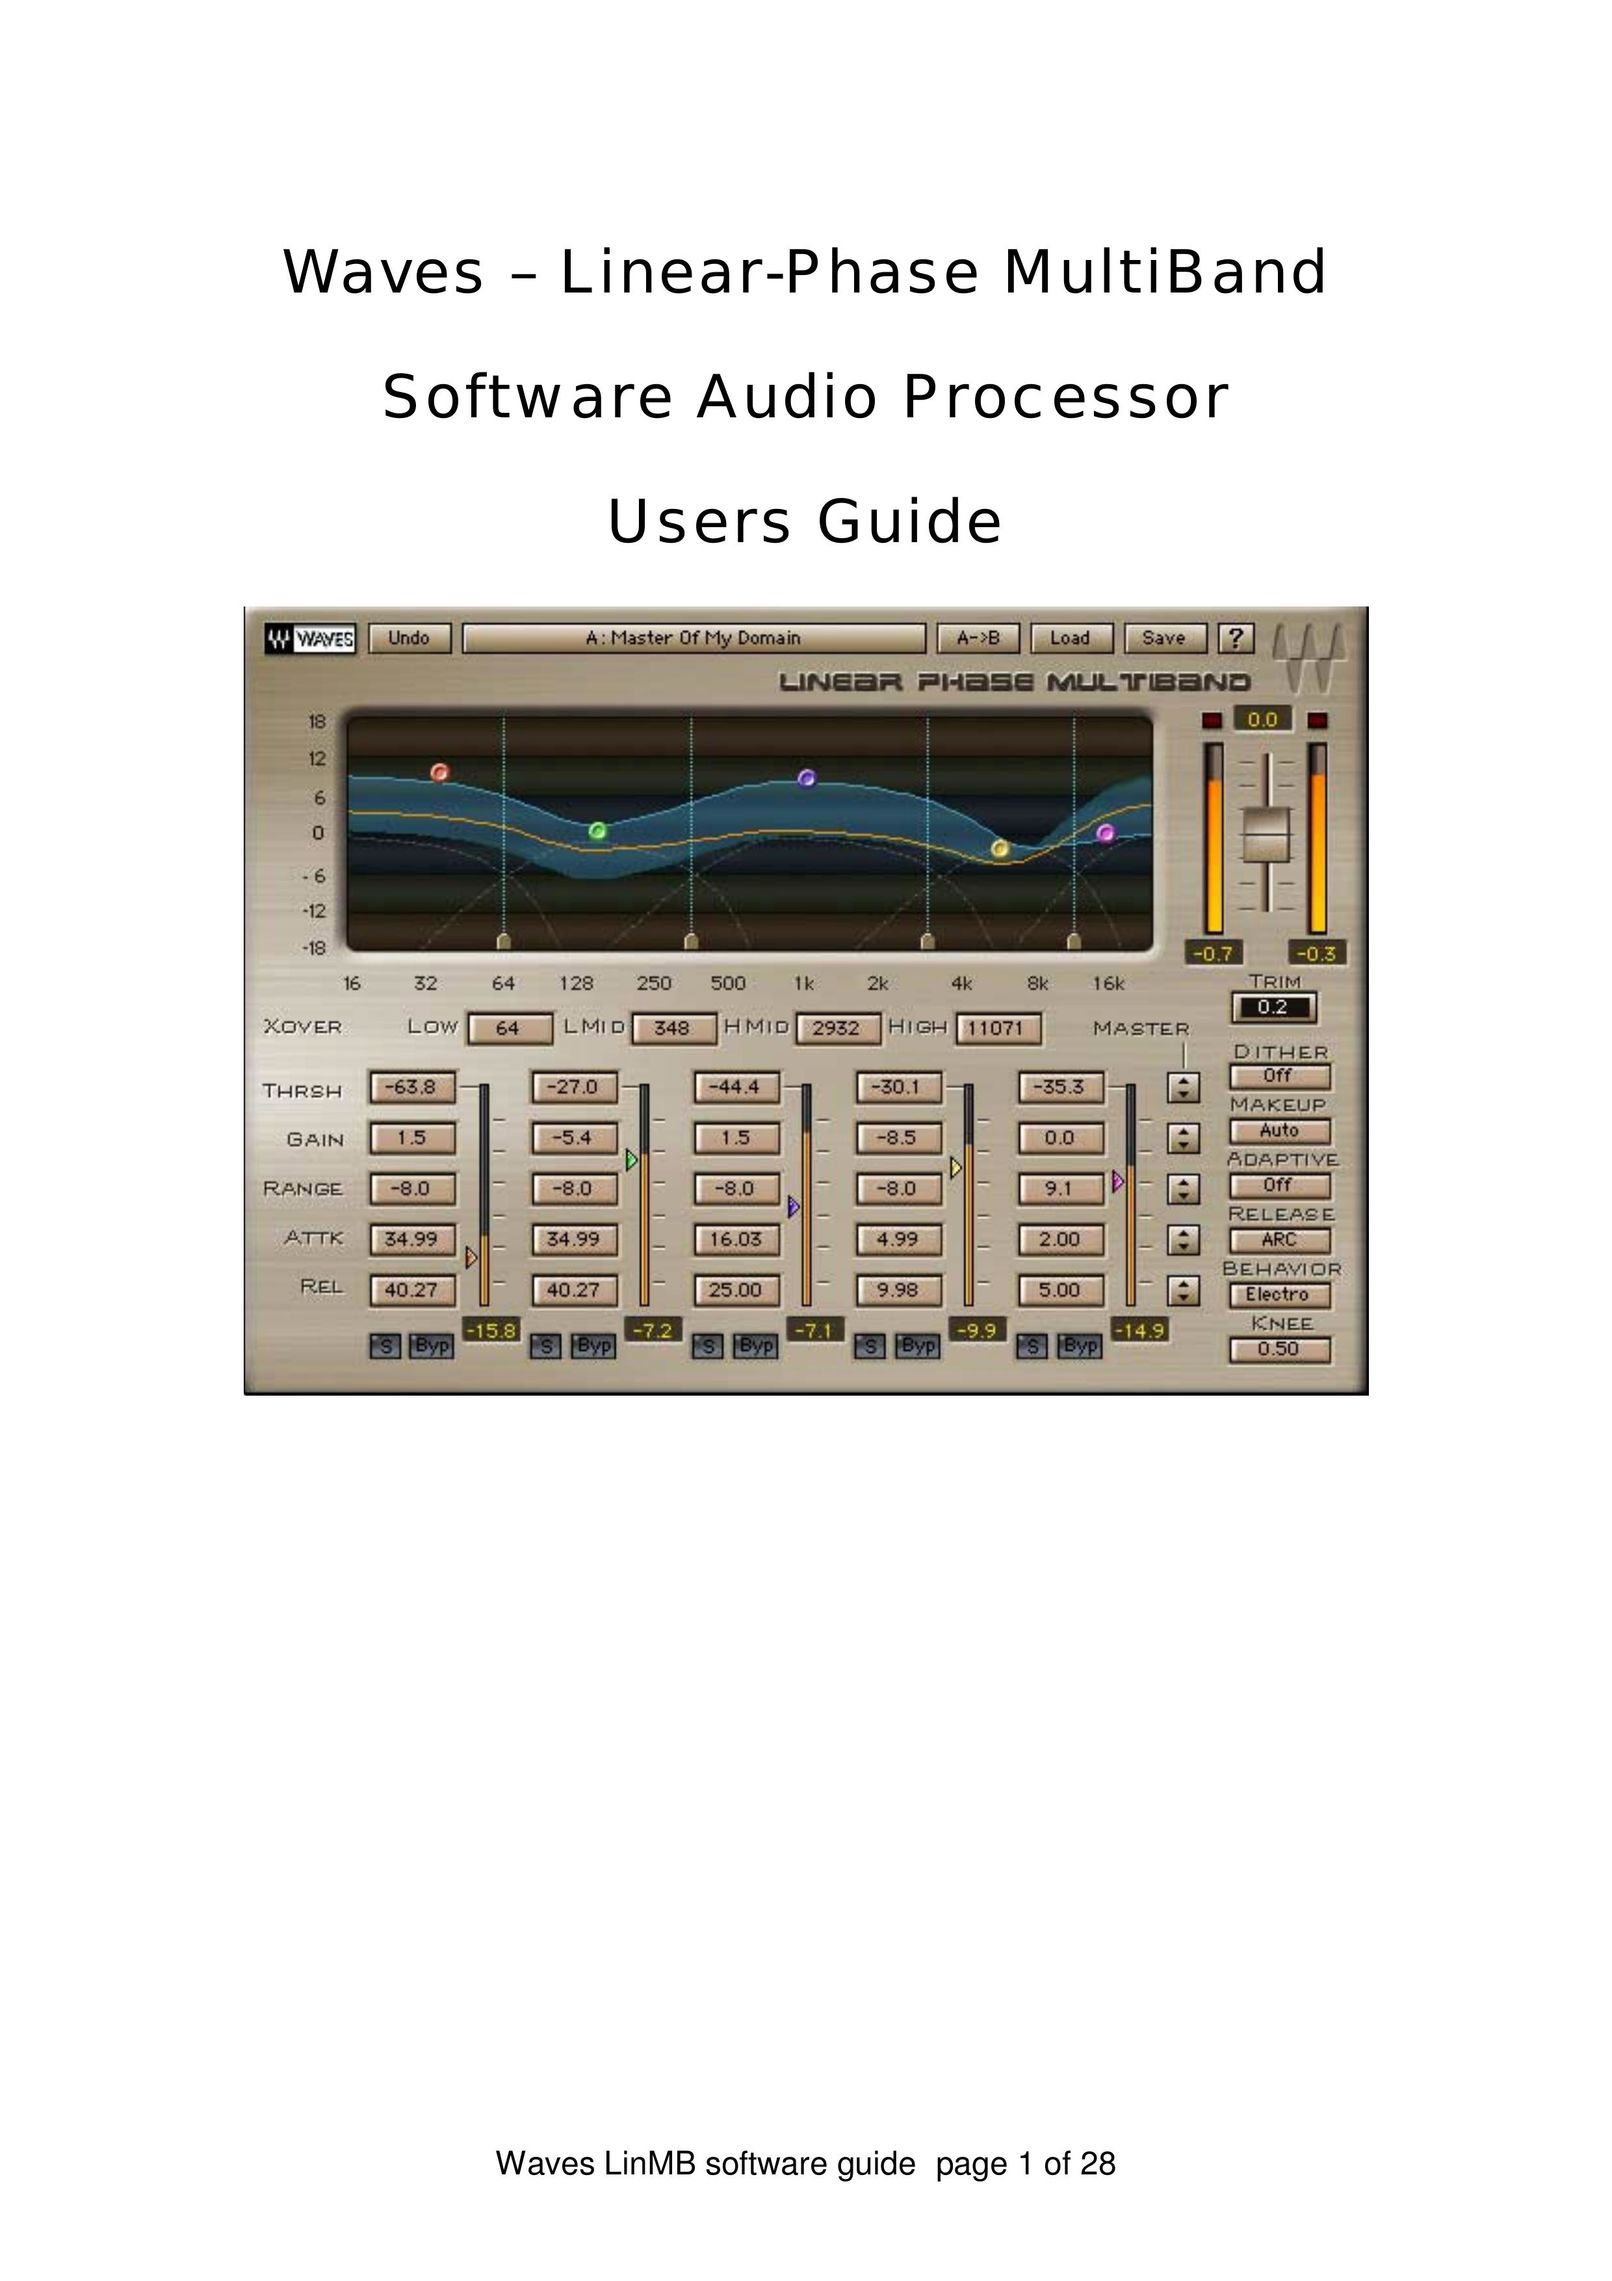 Waves Linear-Phase MultiBand Software Audio Processor Speaker System User Manual